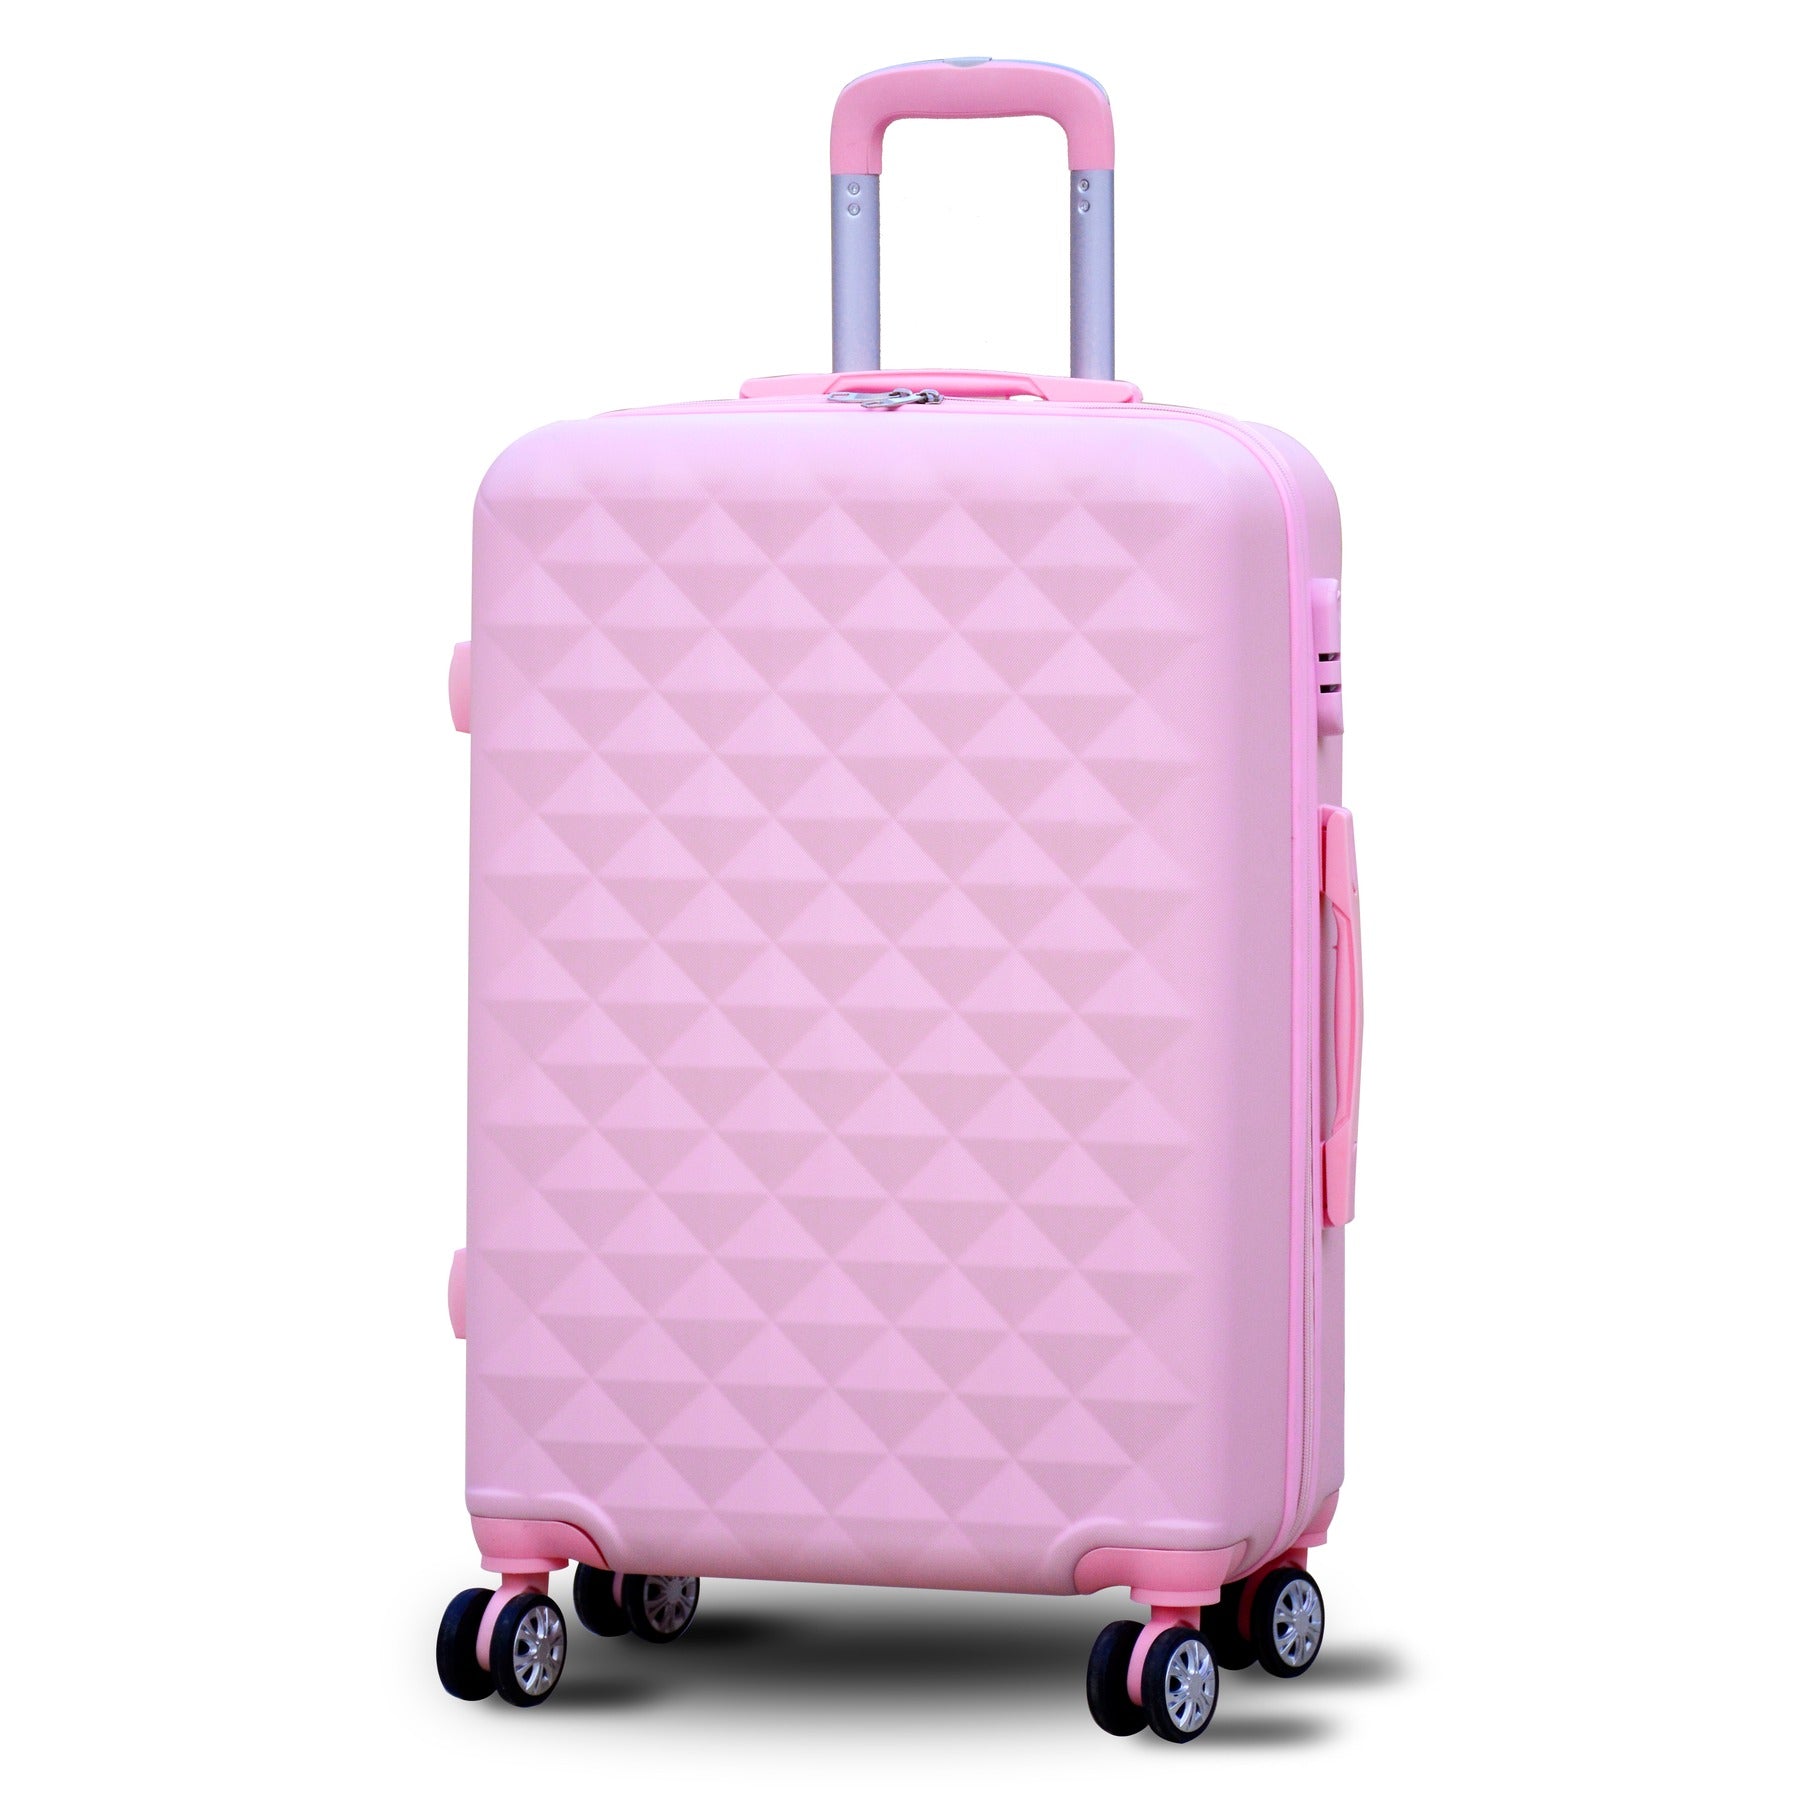 28" Pink Colour Diamond Cut ABS Lightweight Luggage Bag With Spinner Wheel Zaappy.com